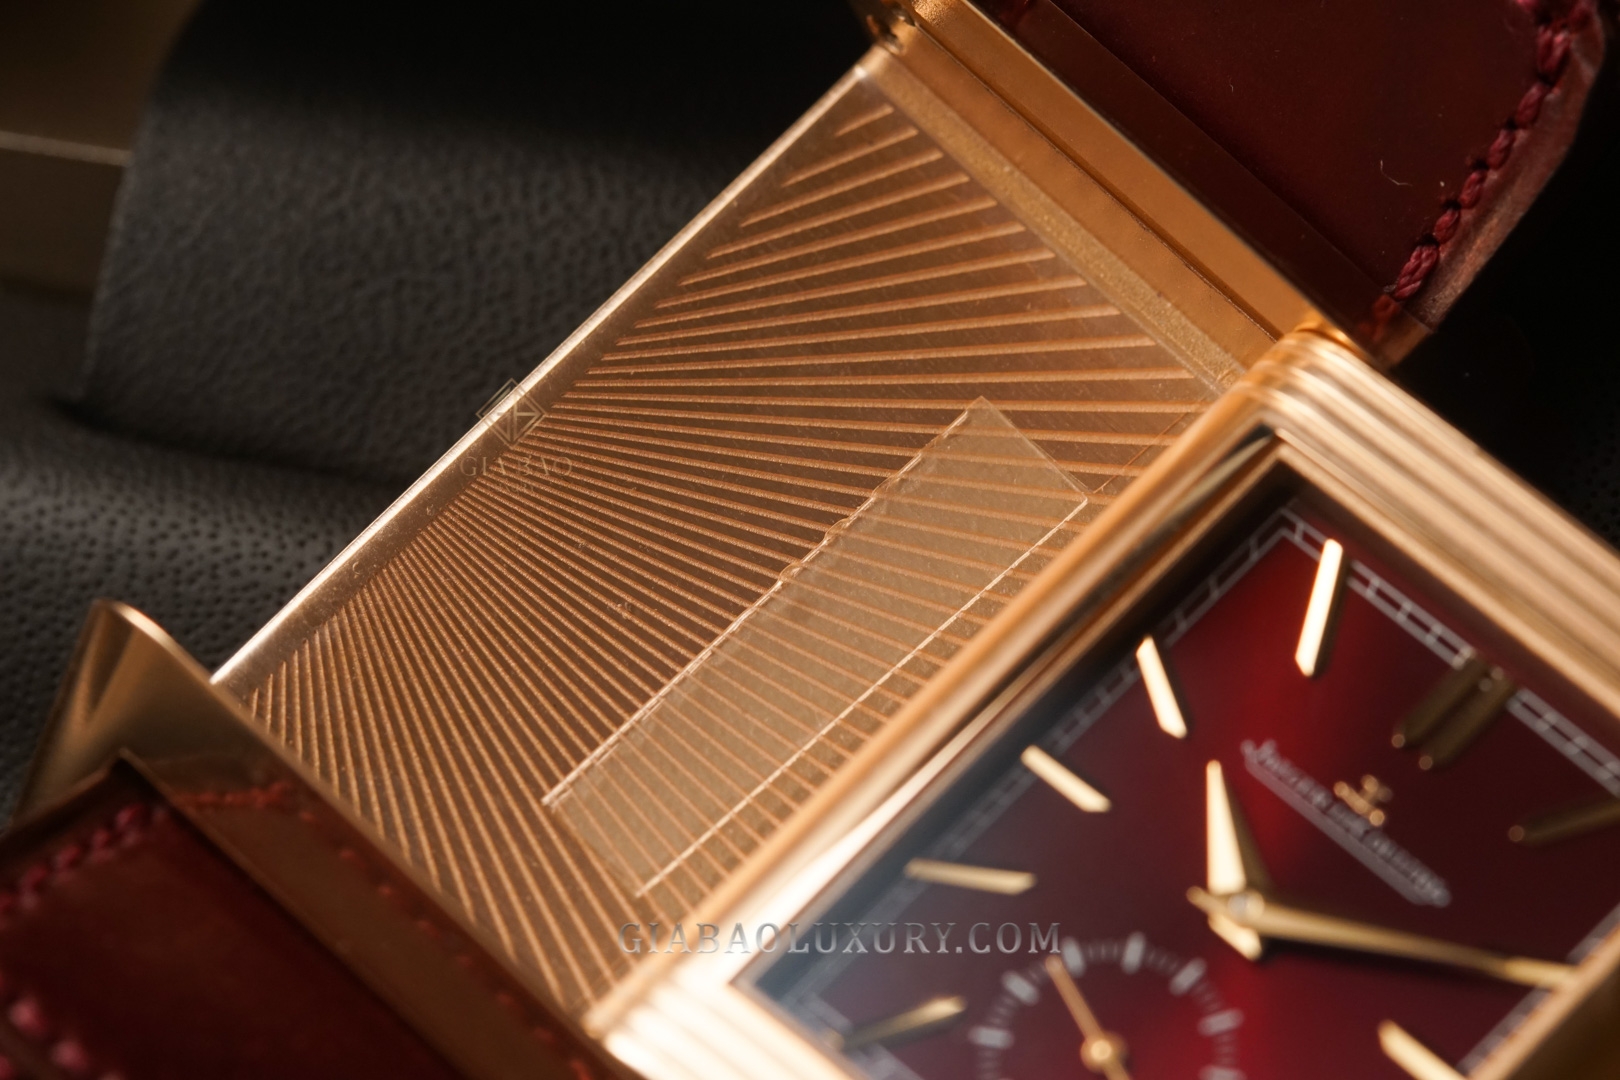 Đồng Hồ Jaeger-LeCoultre Reverso Tribute Duoface Fagliano Limited Edition Q398256J